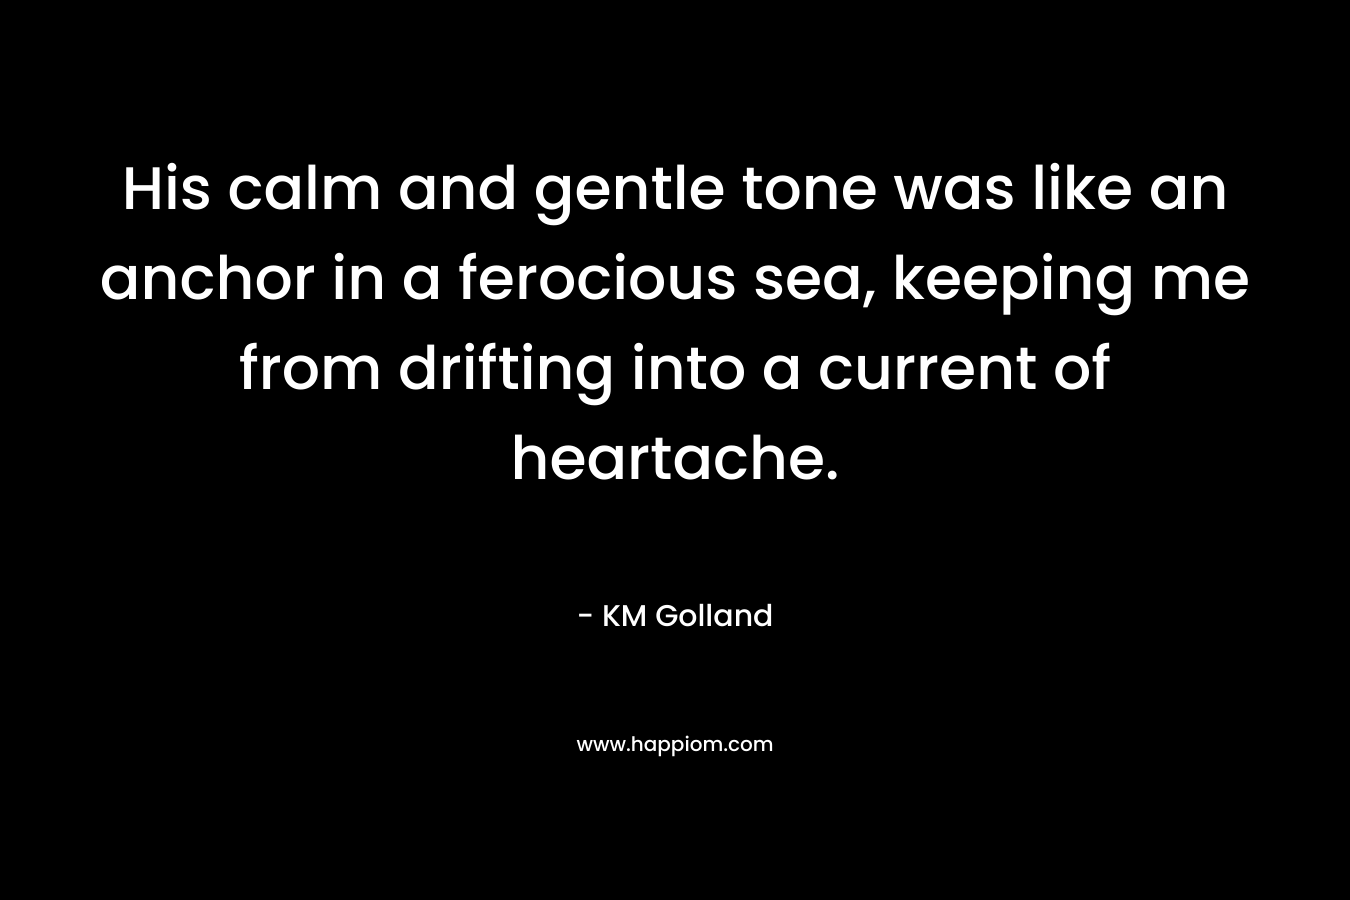 His calm and gentle tone was like an anchor in a ferocious sea, keeping me from drifting into a current of heartache. – KM Golland